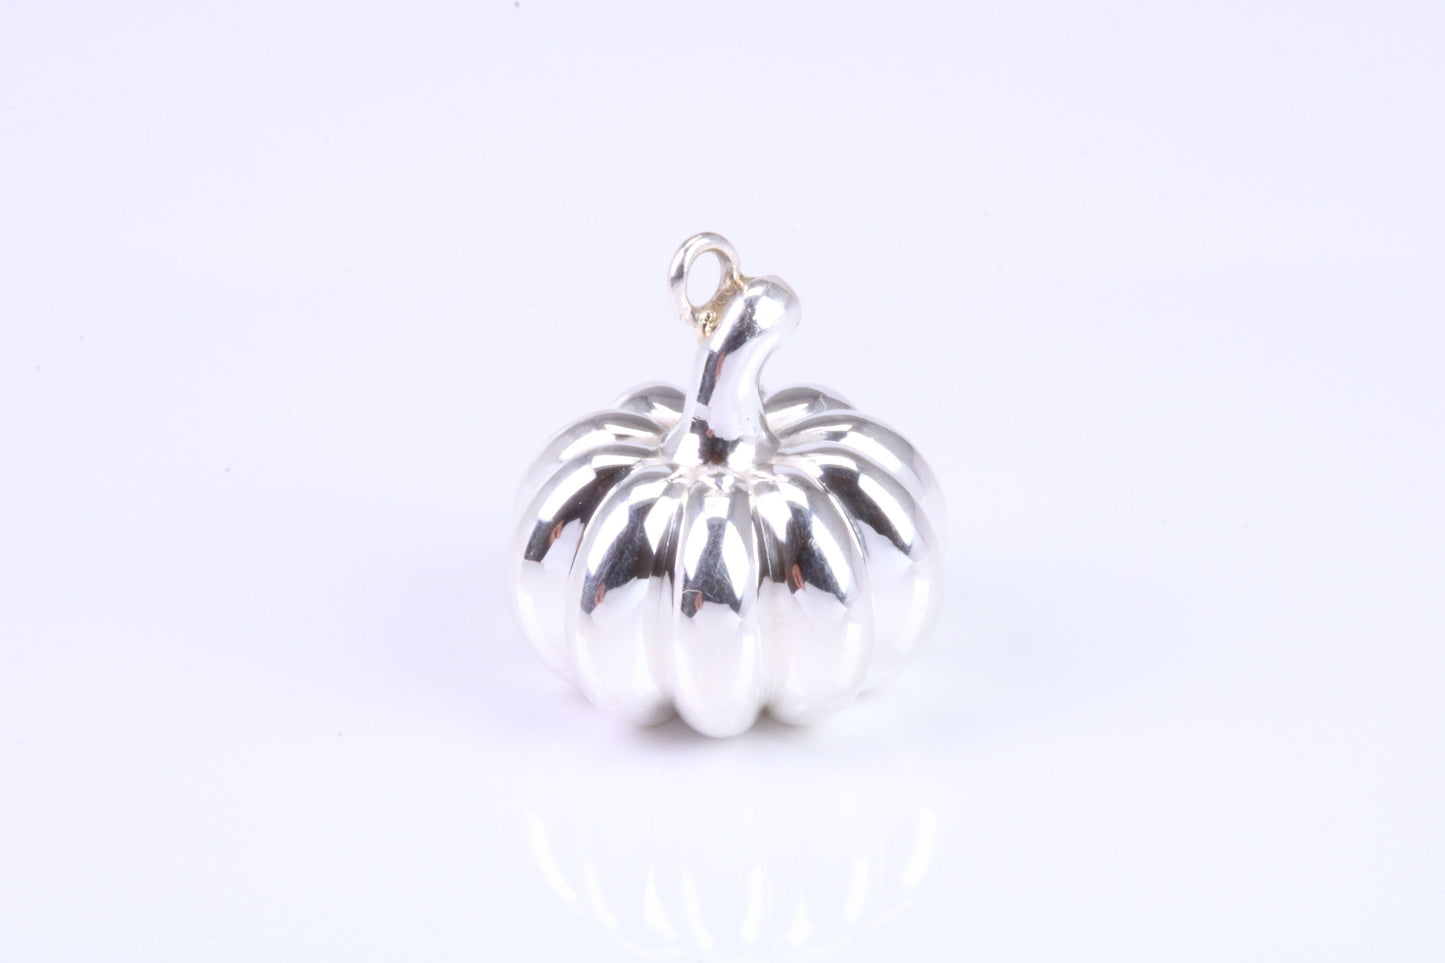 Solid Pumpkin Charm, Traditional Charm, Made from Solid 925 Grade Sterling Silver, Complete with Attachment Link